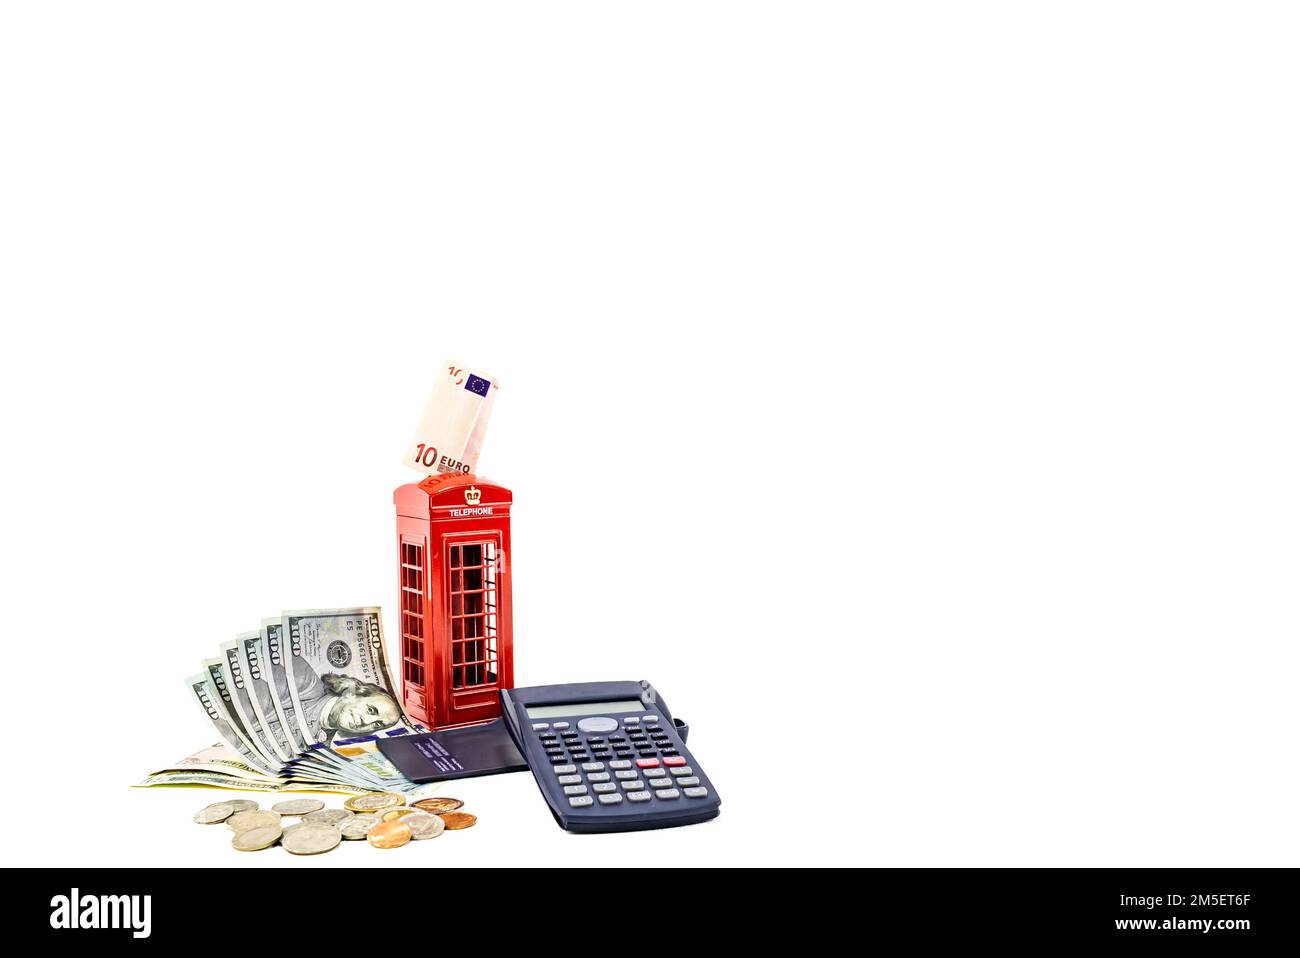 Red phone booth with dollar, euro, and calculator money box london, penny or piggy bank on white background. Saving money concept idea photo hd. Coins Stock Photo